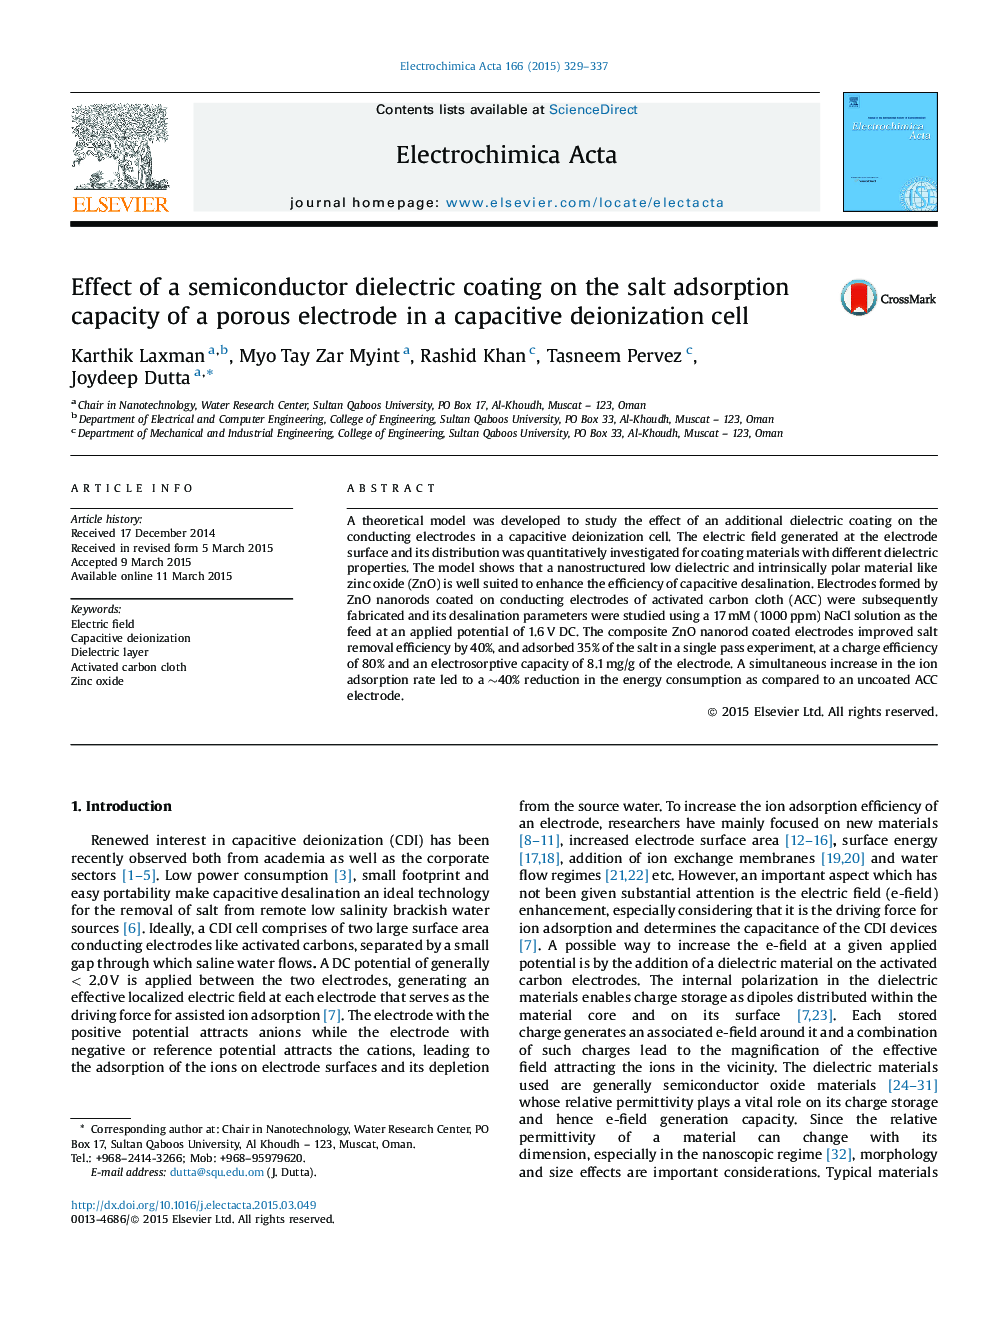 Effect of a semiconductor dielectric coating on the salt adsorption capacity of a porous electrode in a capacitive deionization cell